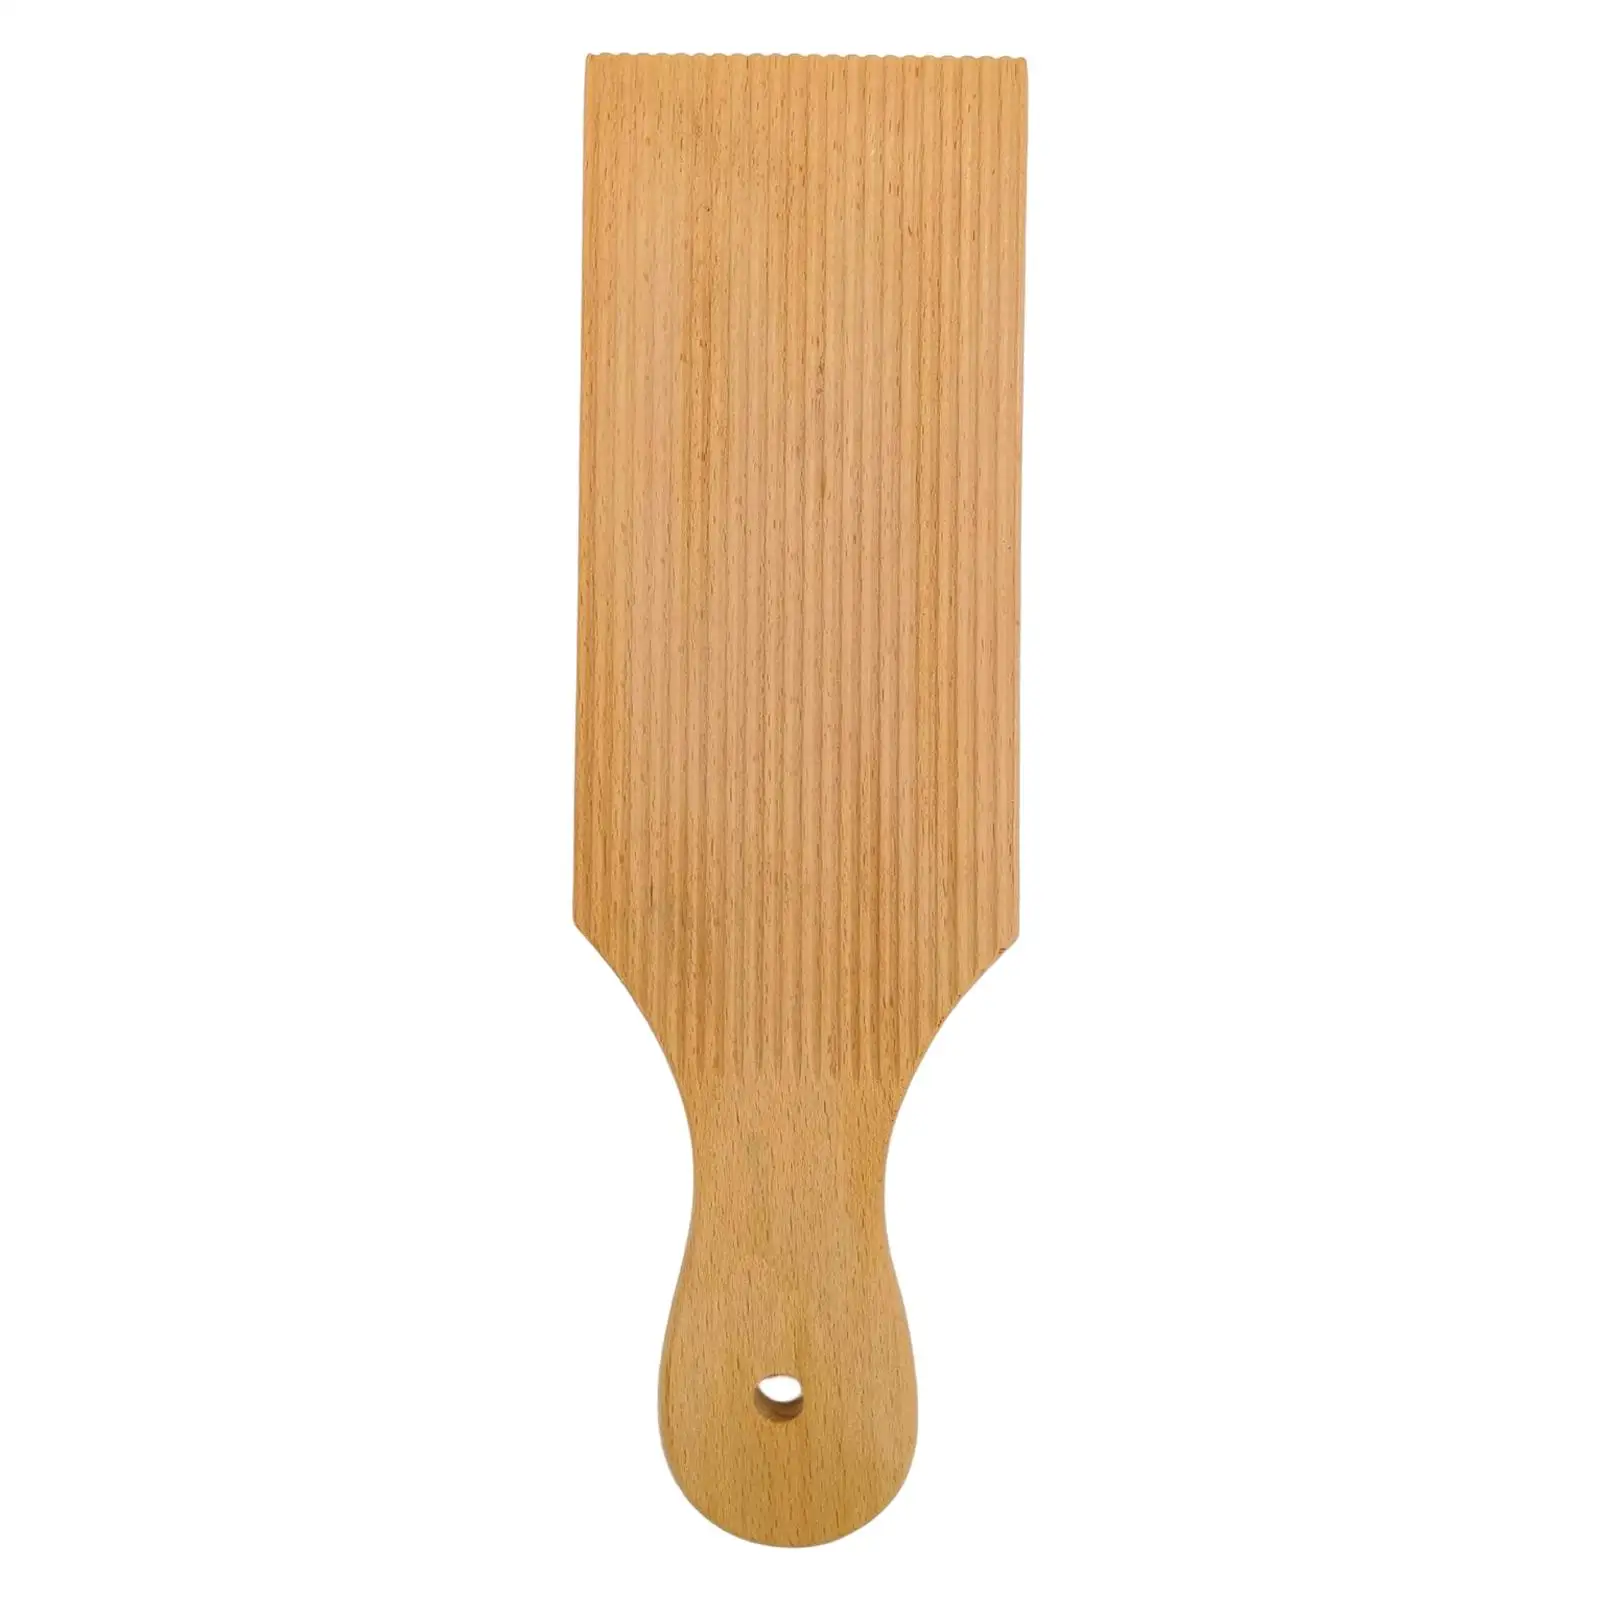 Gnocchi Pasta Boards Pasta Making Tools Roller Wooden Kitchen Utensil Spiral Noodle Tool for Noodle Making Pasta and Butter Home